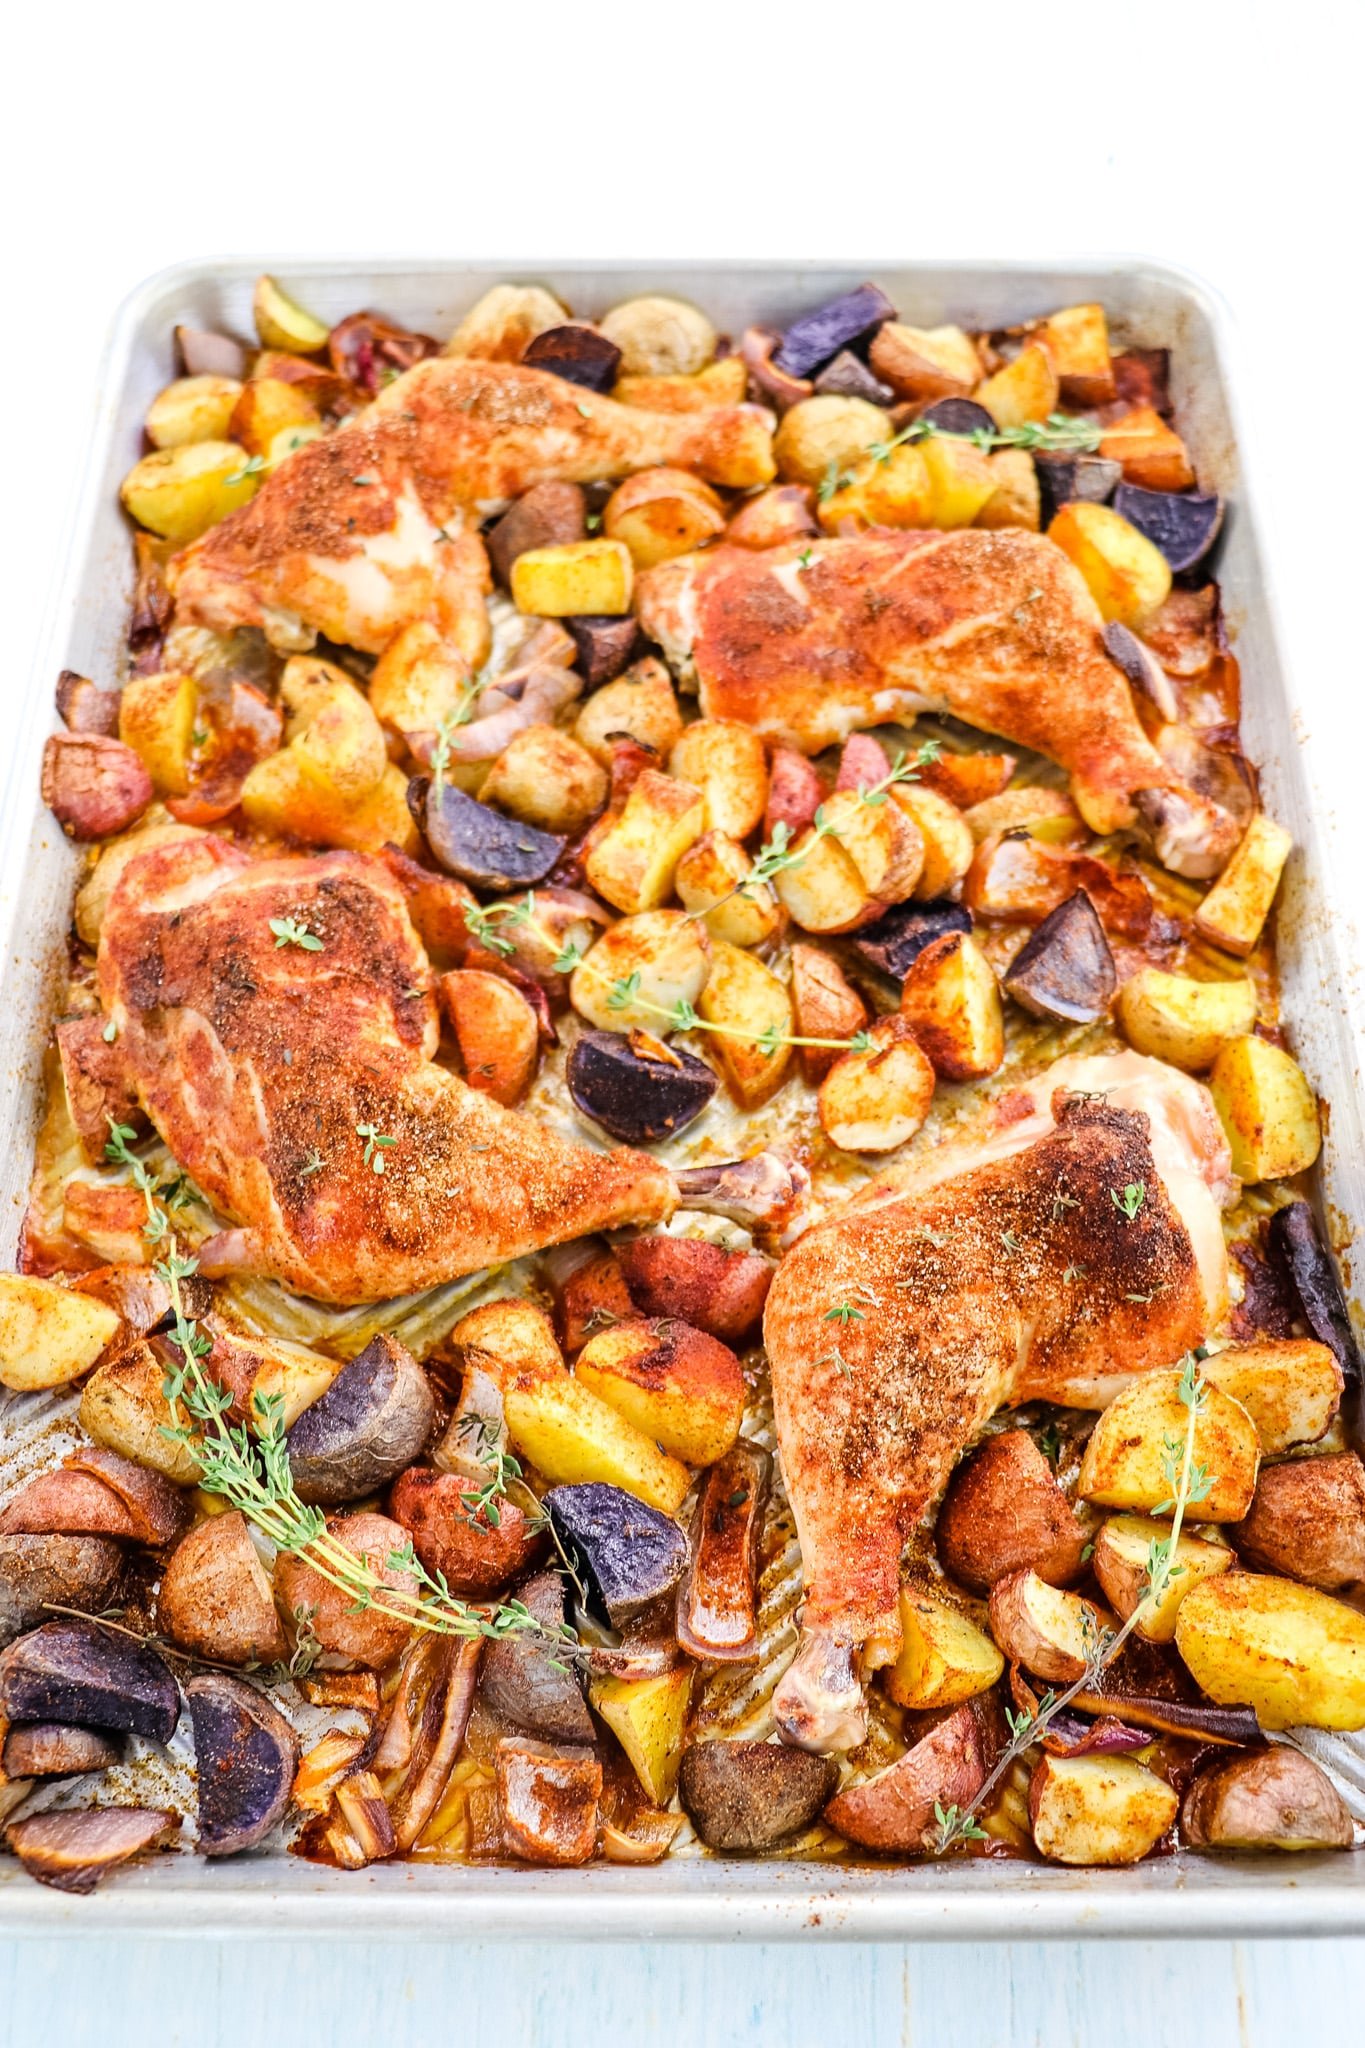 Oven baked chicken quarters with potatoes and onions on a sheet pan.